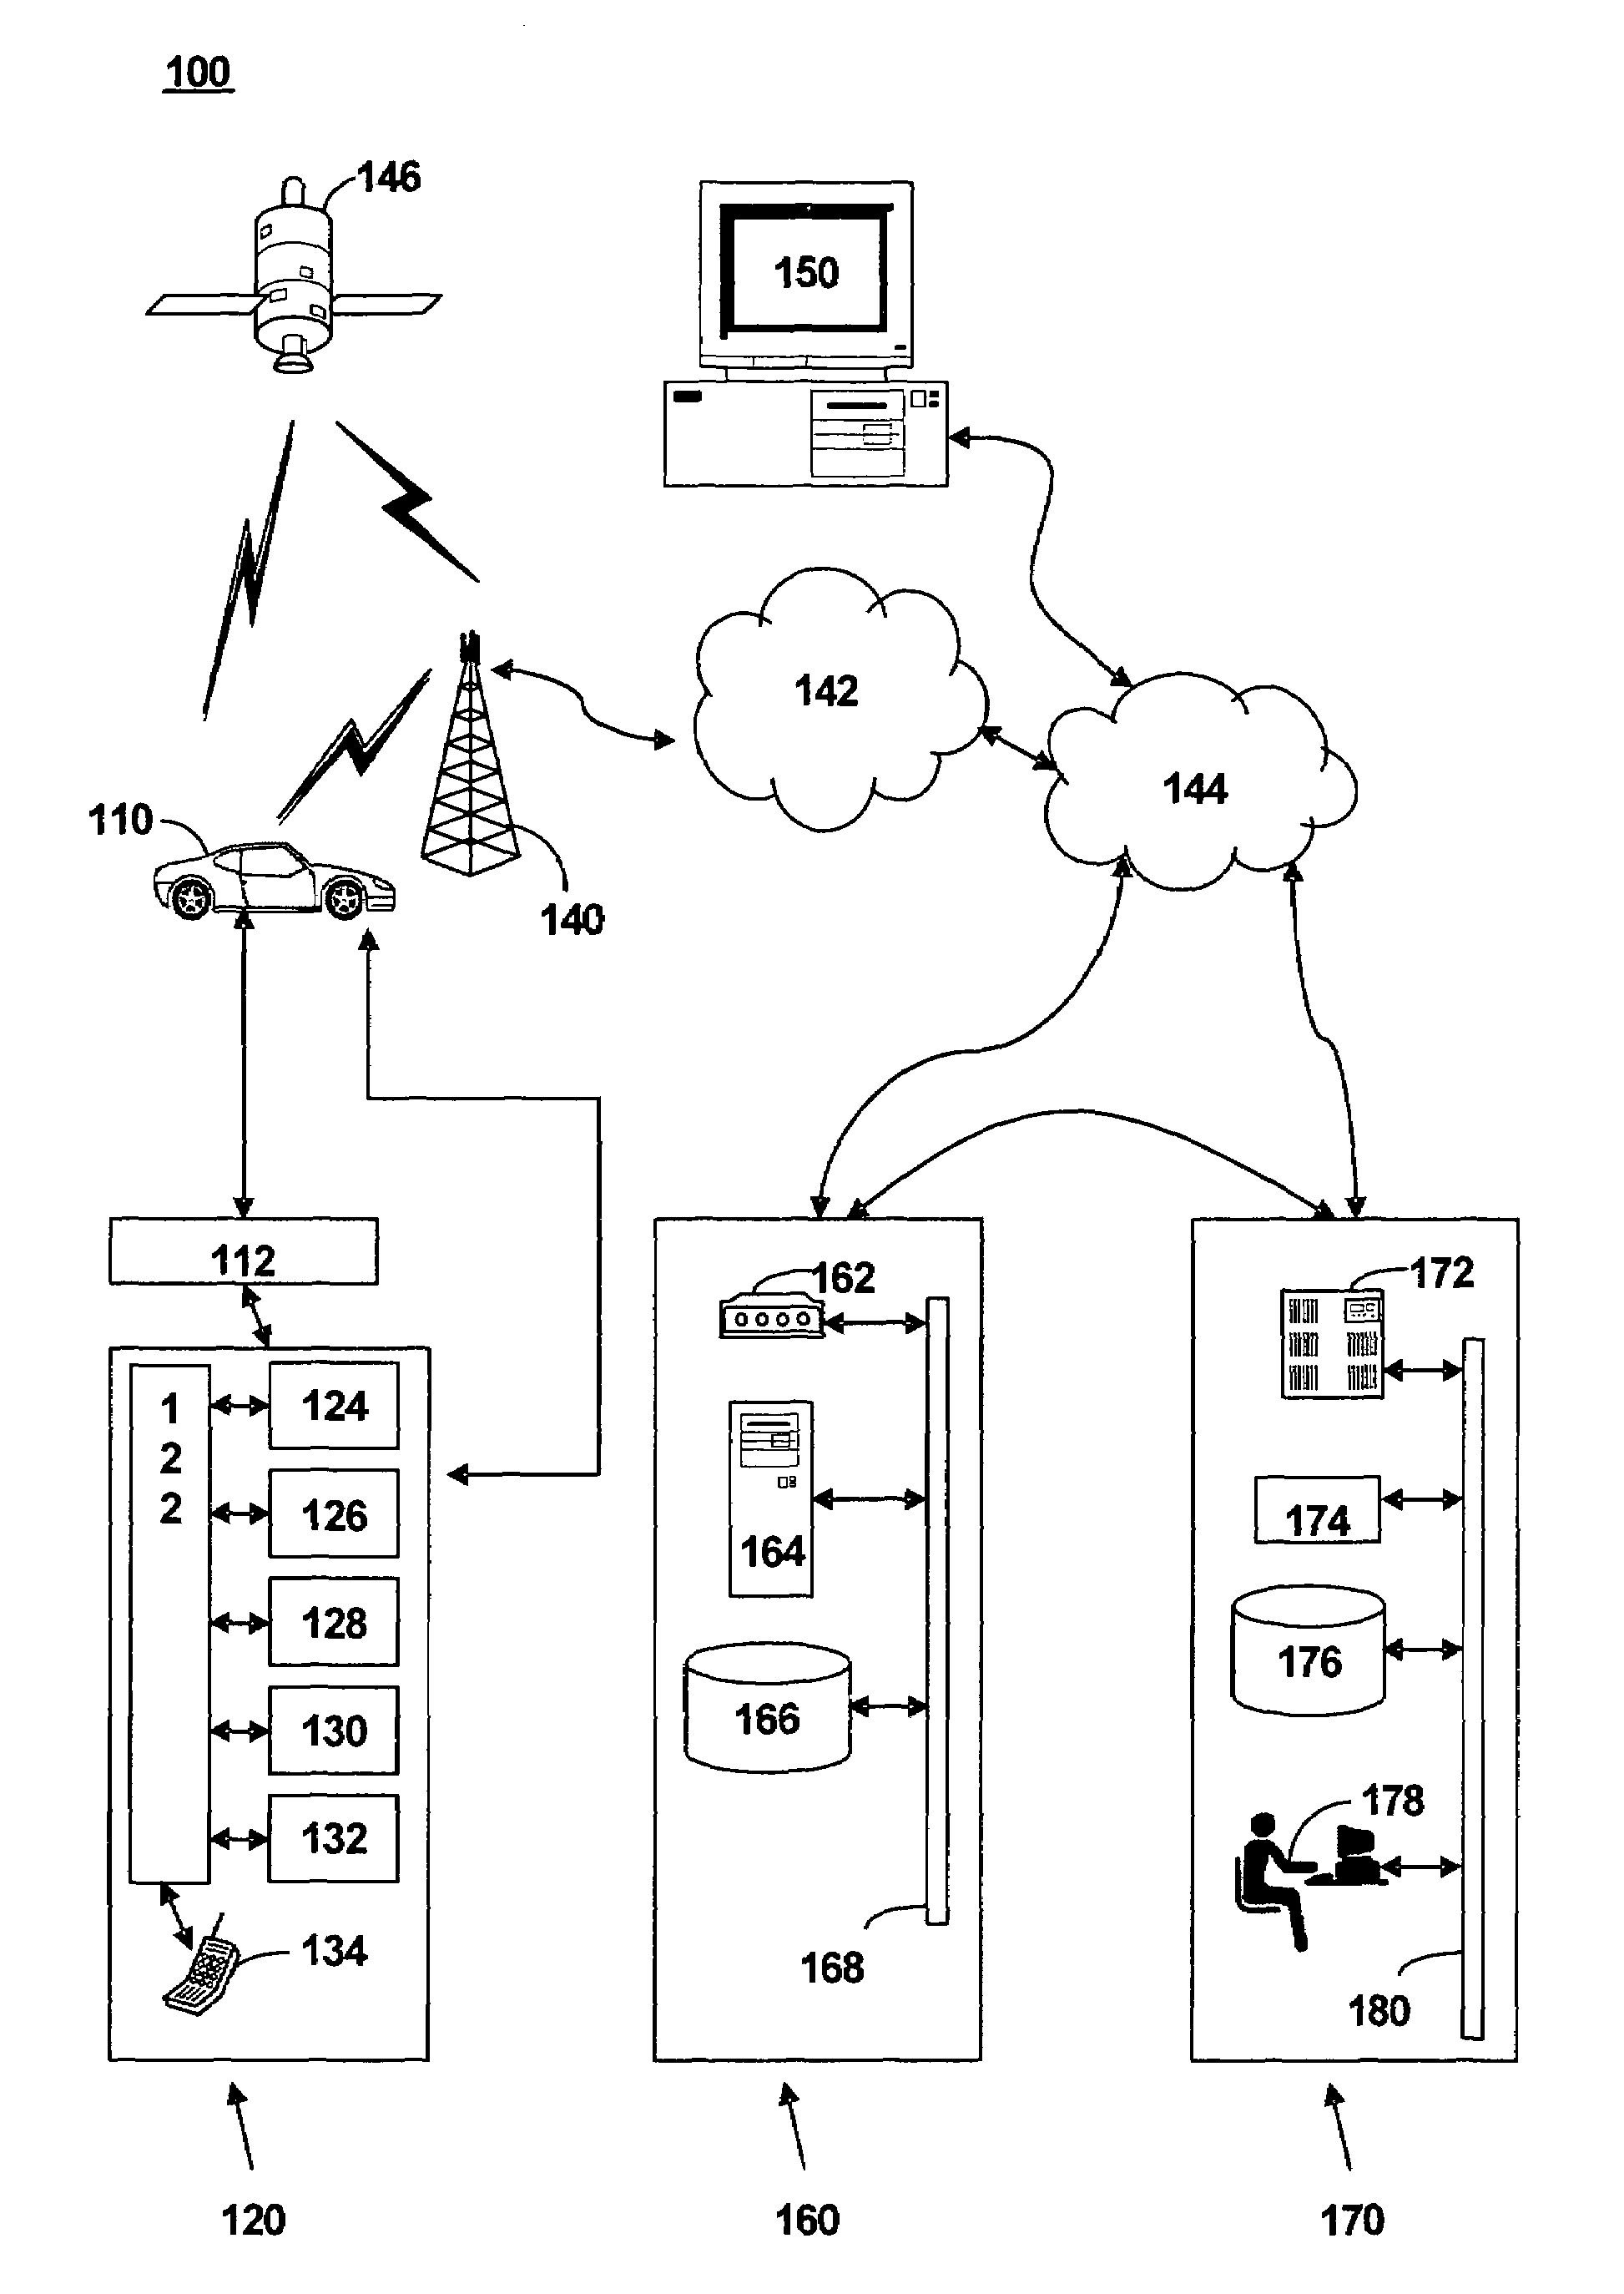 Method and system for determining traffic information traffic profiles